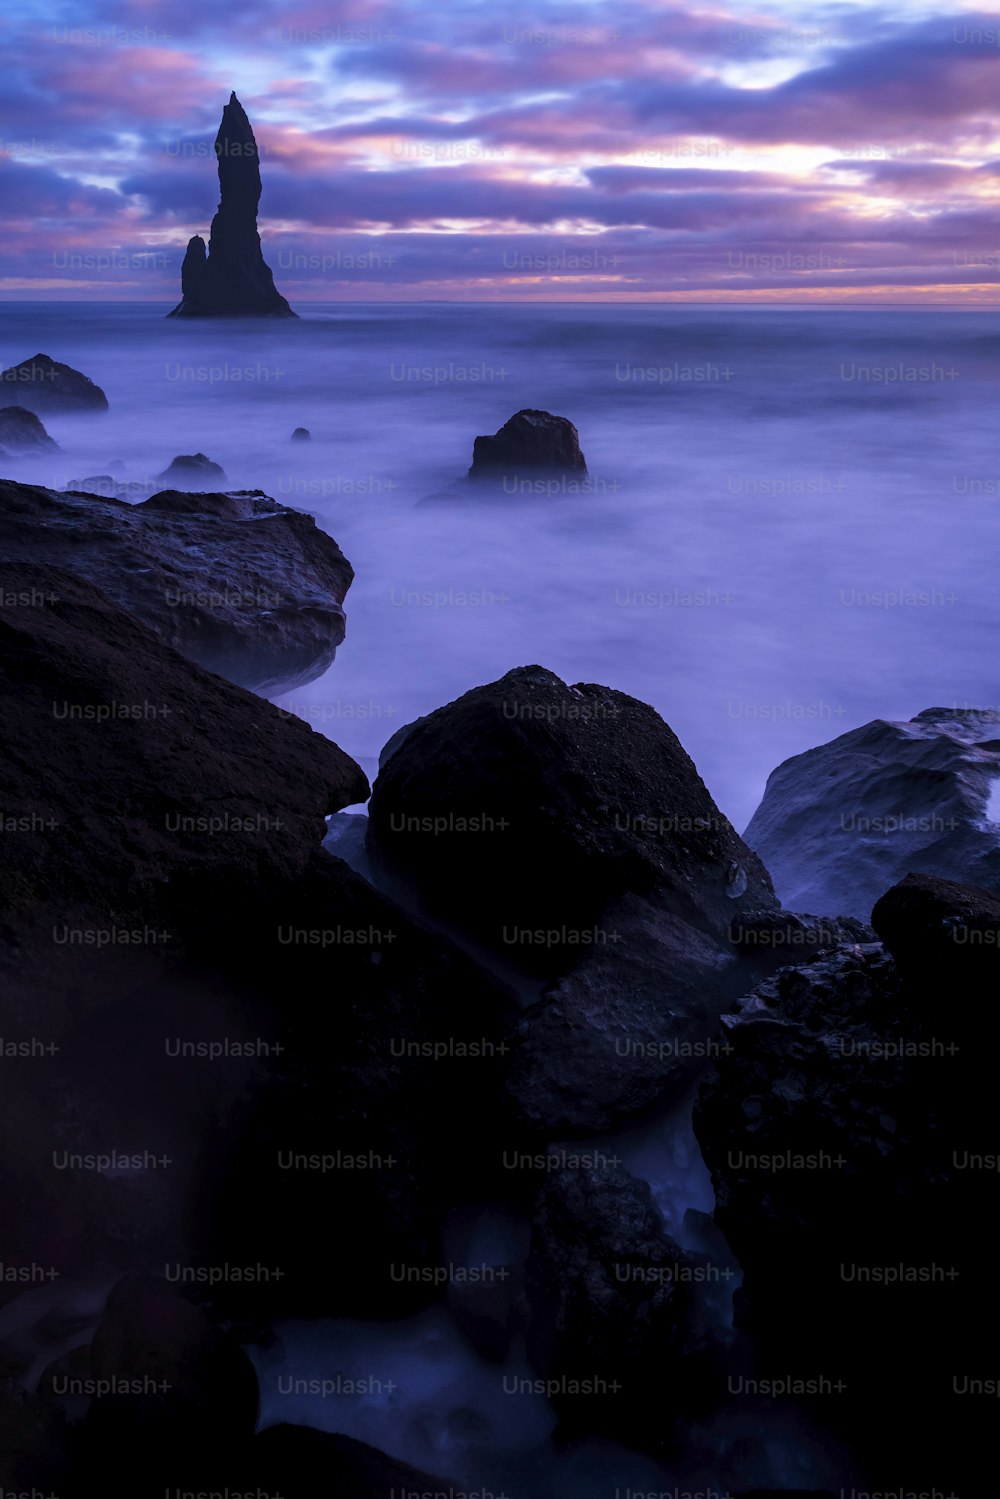 a long exposure photo of the ocean with rocks in the foreground